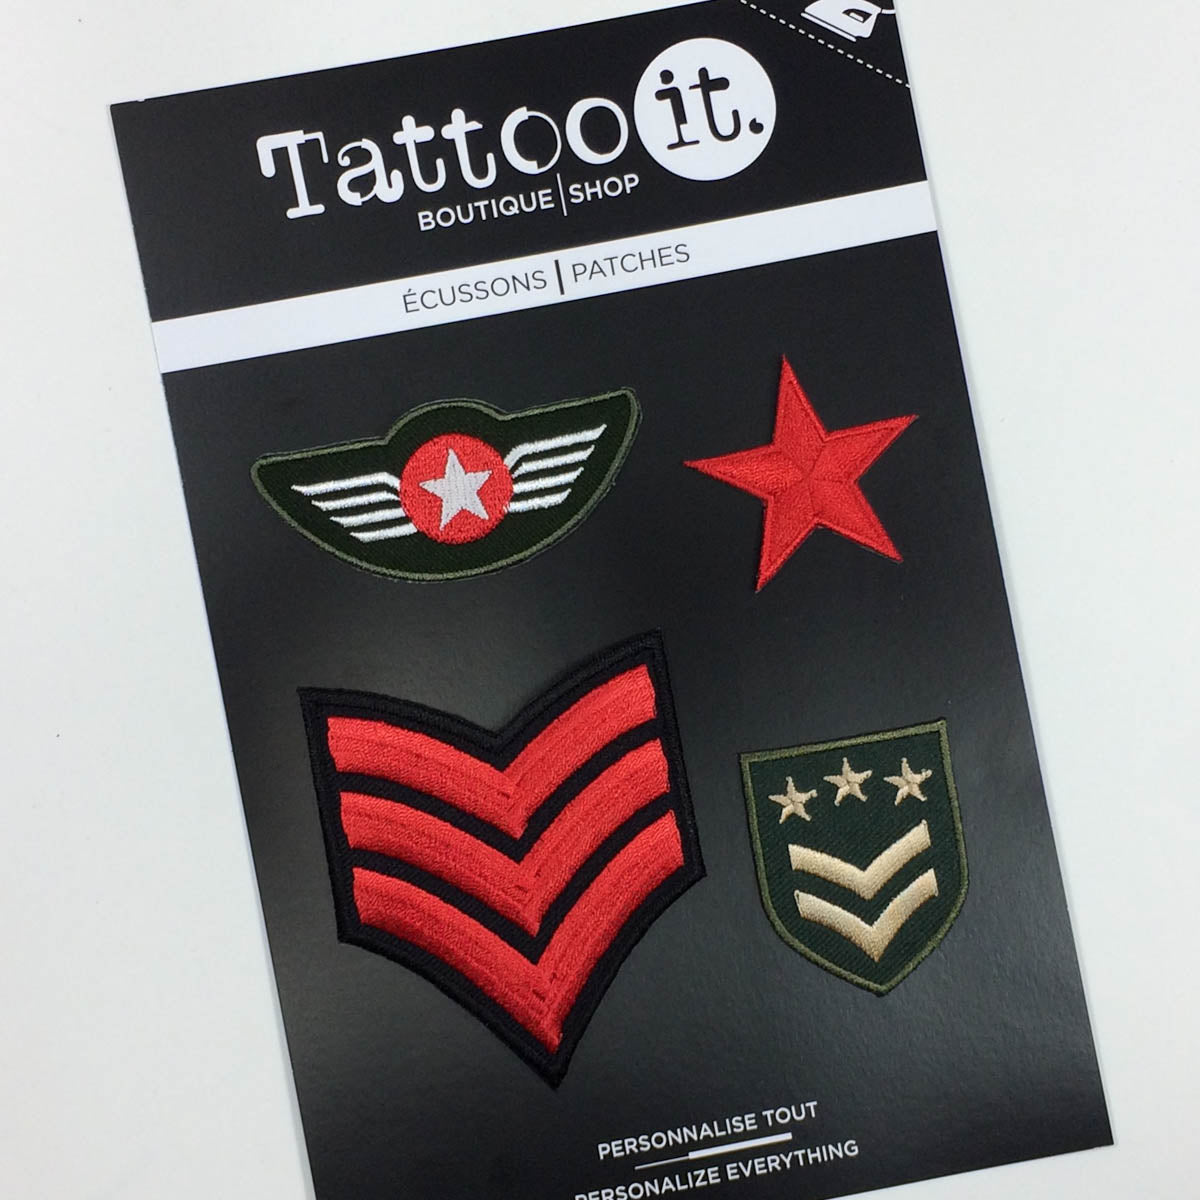 Pilot Patch - Military Badge